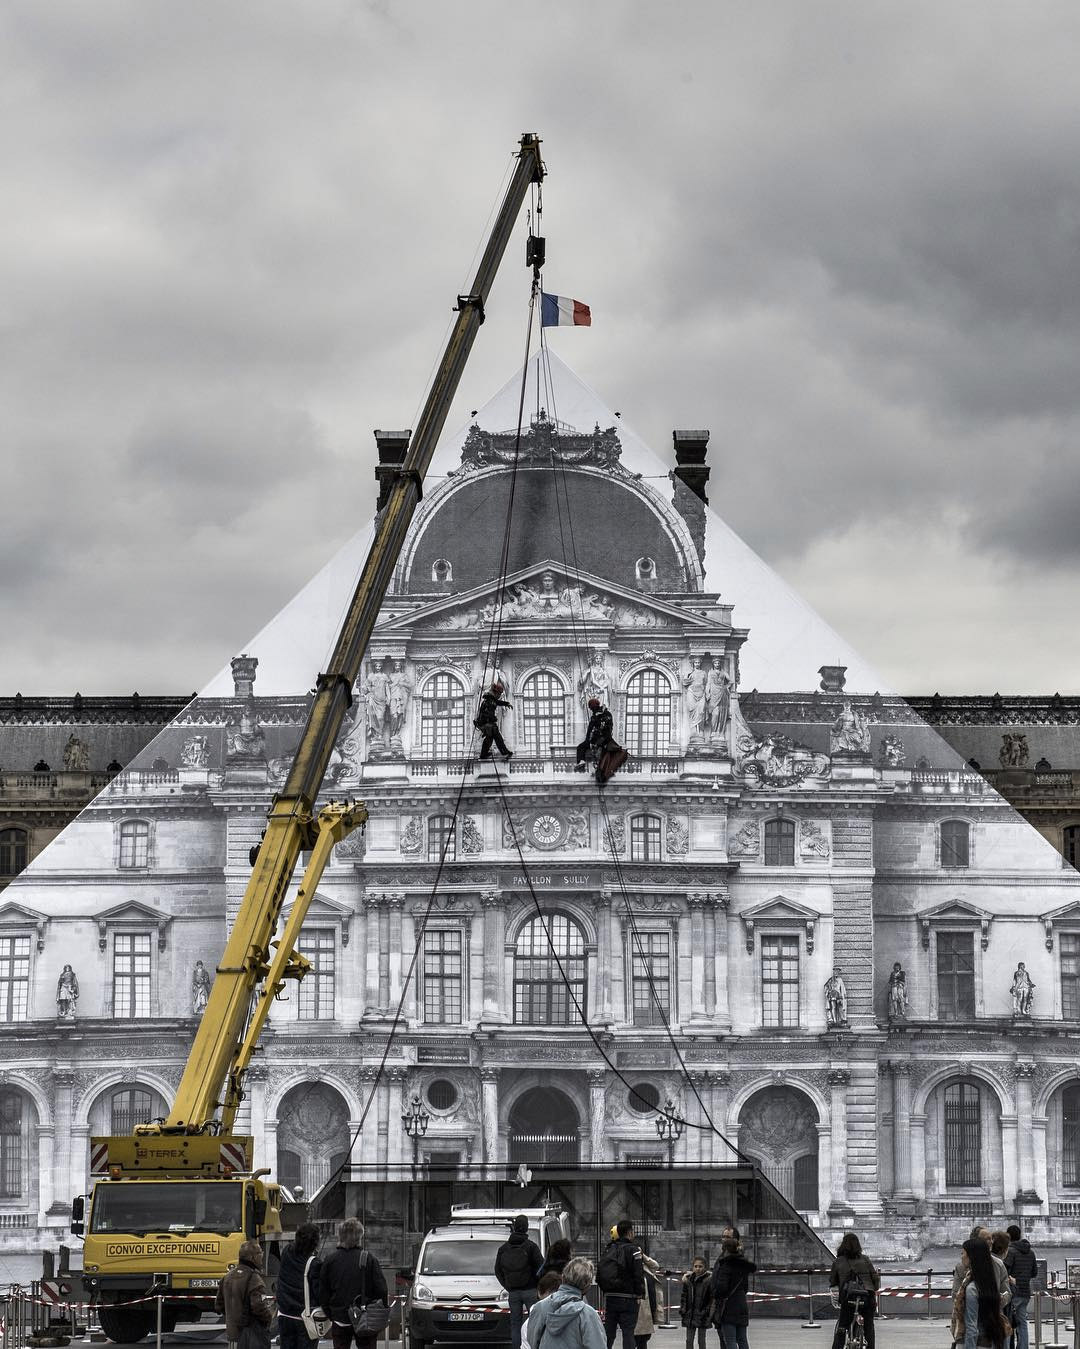 Artist JR Makes the Louvre’s Glass Pyramid Disappear